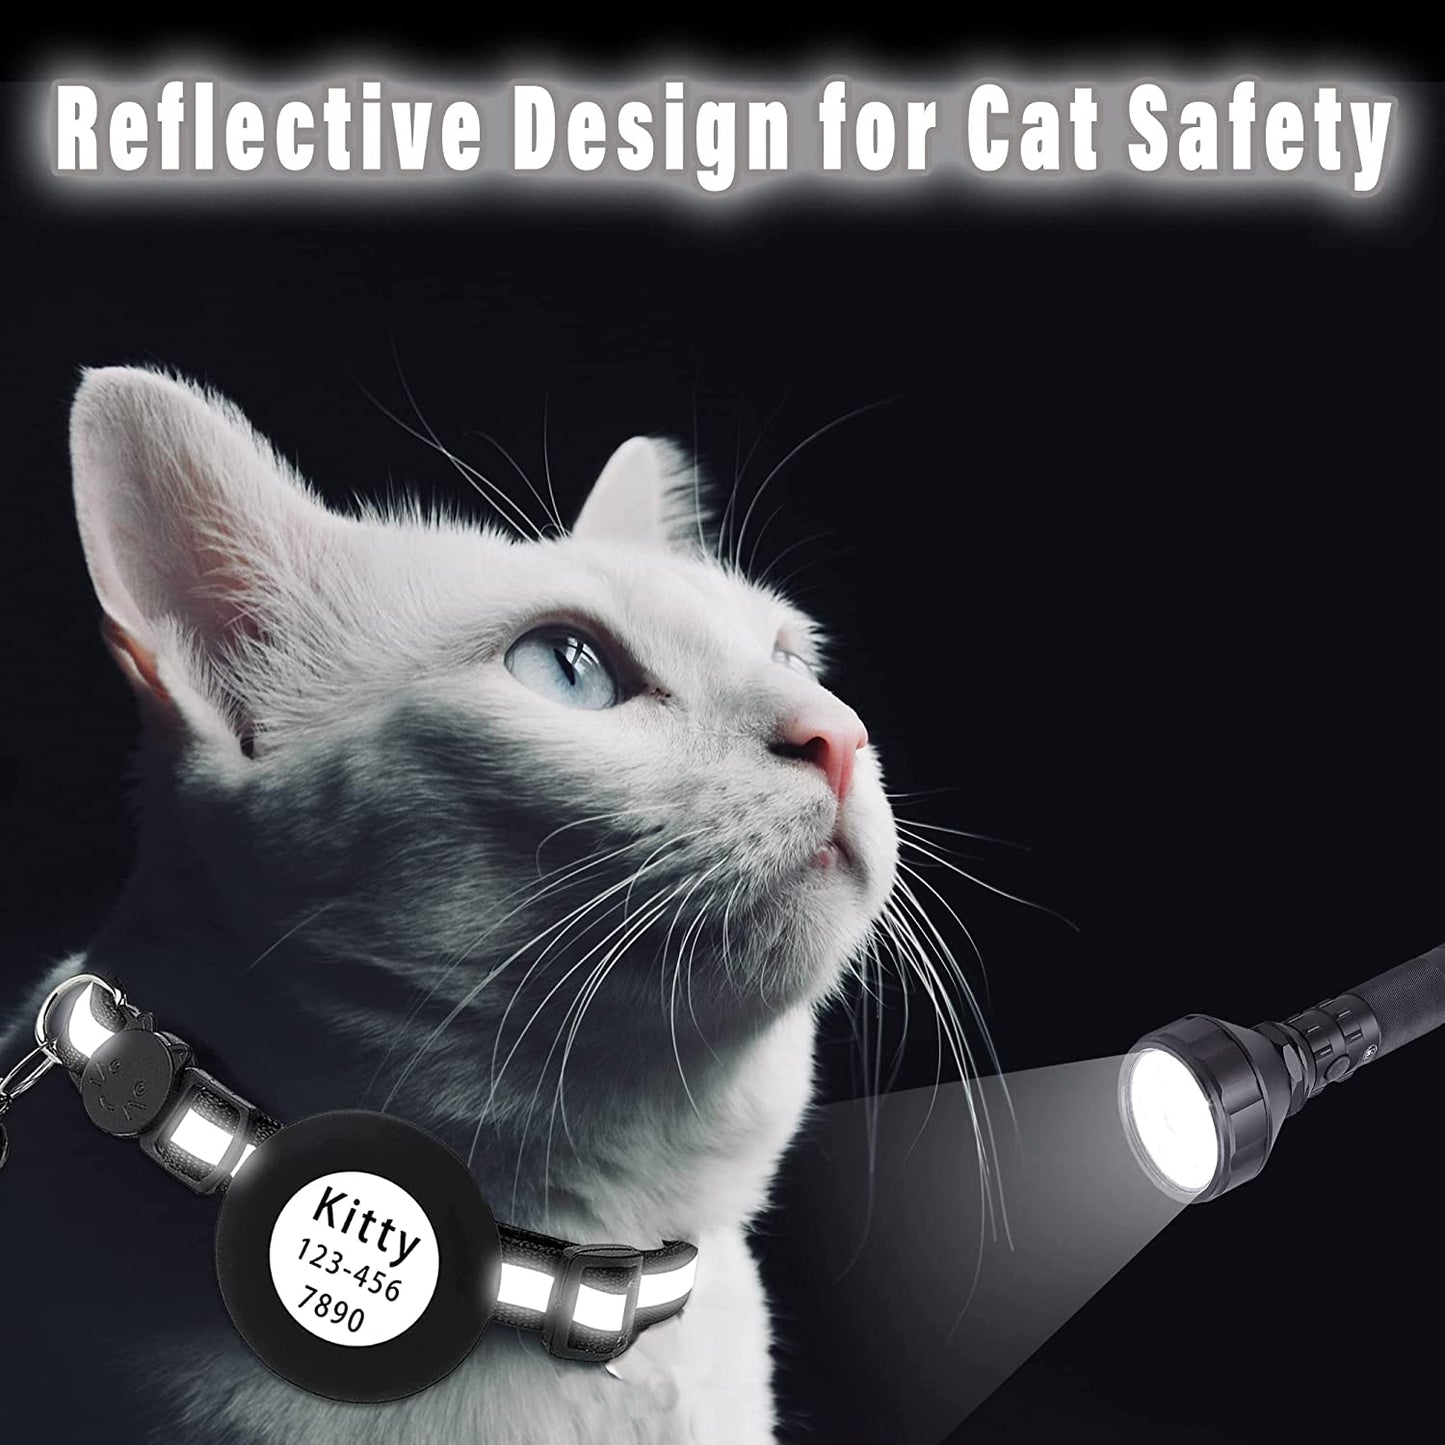 Airtag Cat Collar with Apple Airtag Holder, Safety Buckle, Bell in 3/8 Inch Reflective Lightweight Collar, DIY Pet ID with TPU Airtag Protector on Cute Air Tag Cat Collar Breakaway